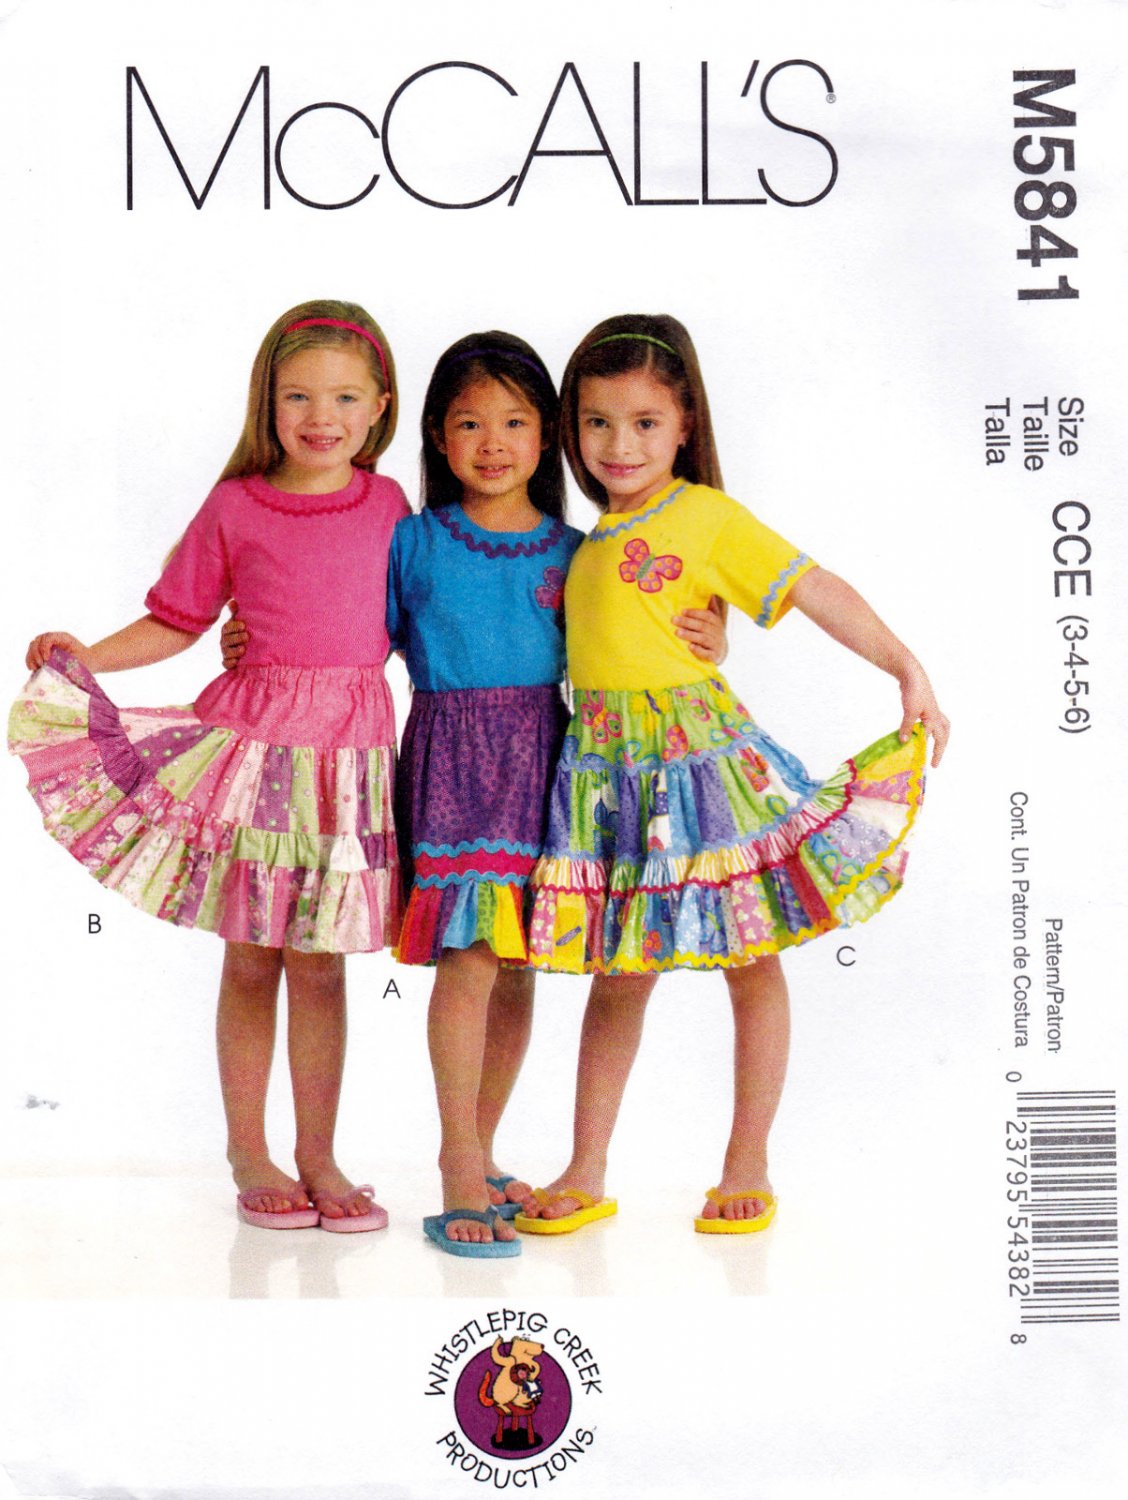 McCall's M5841 5841 Girls Sewing Pattern Childrens Ruffled Skirts and AppliquÃ©s Kids Sizes 3-4-5-6